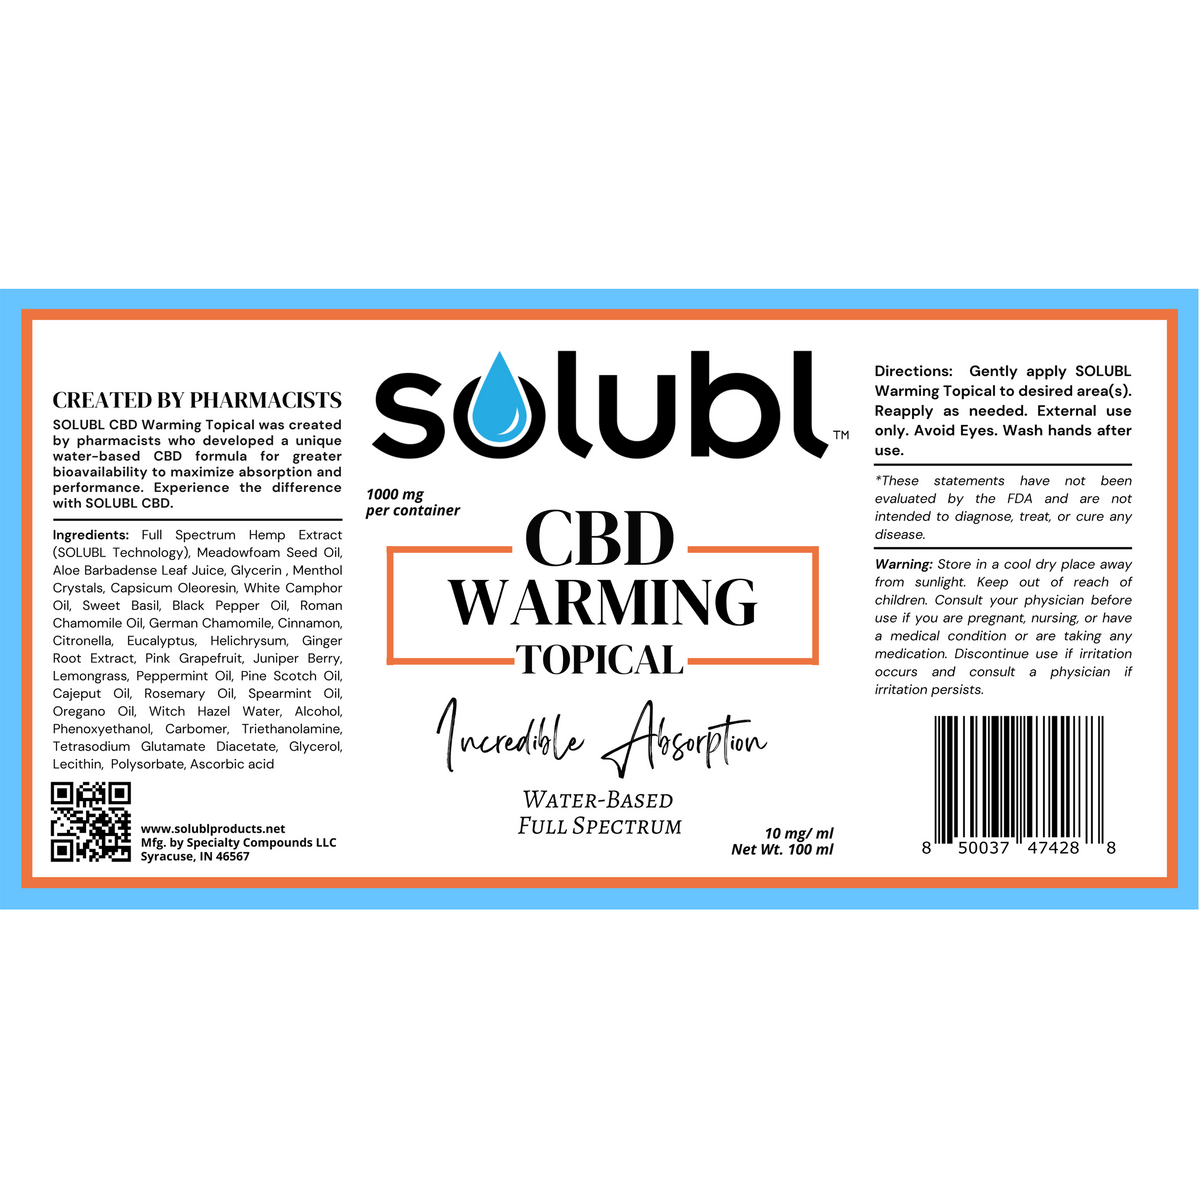 SOLUBL Warming Topical (1000mg)